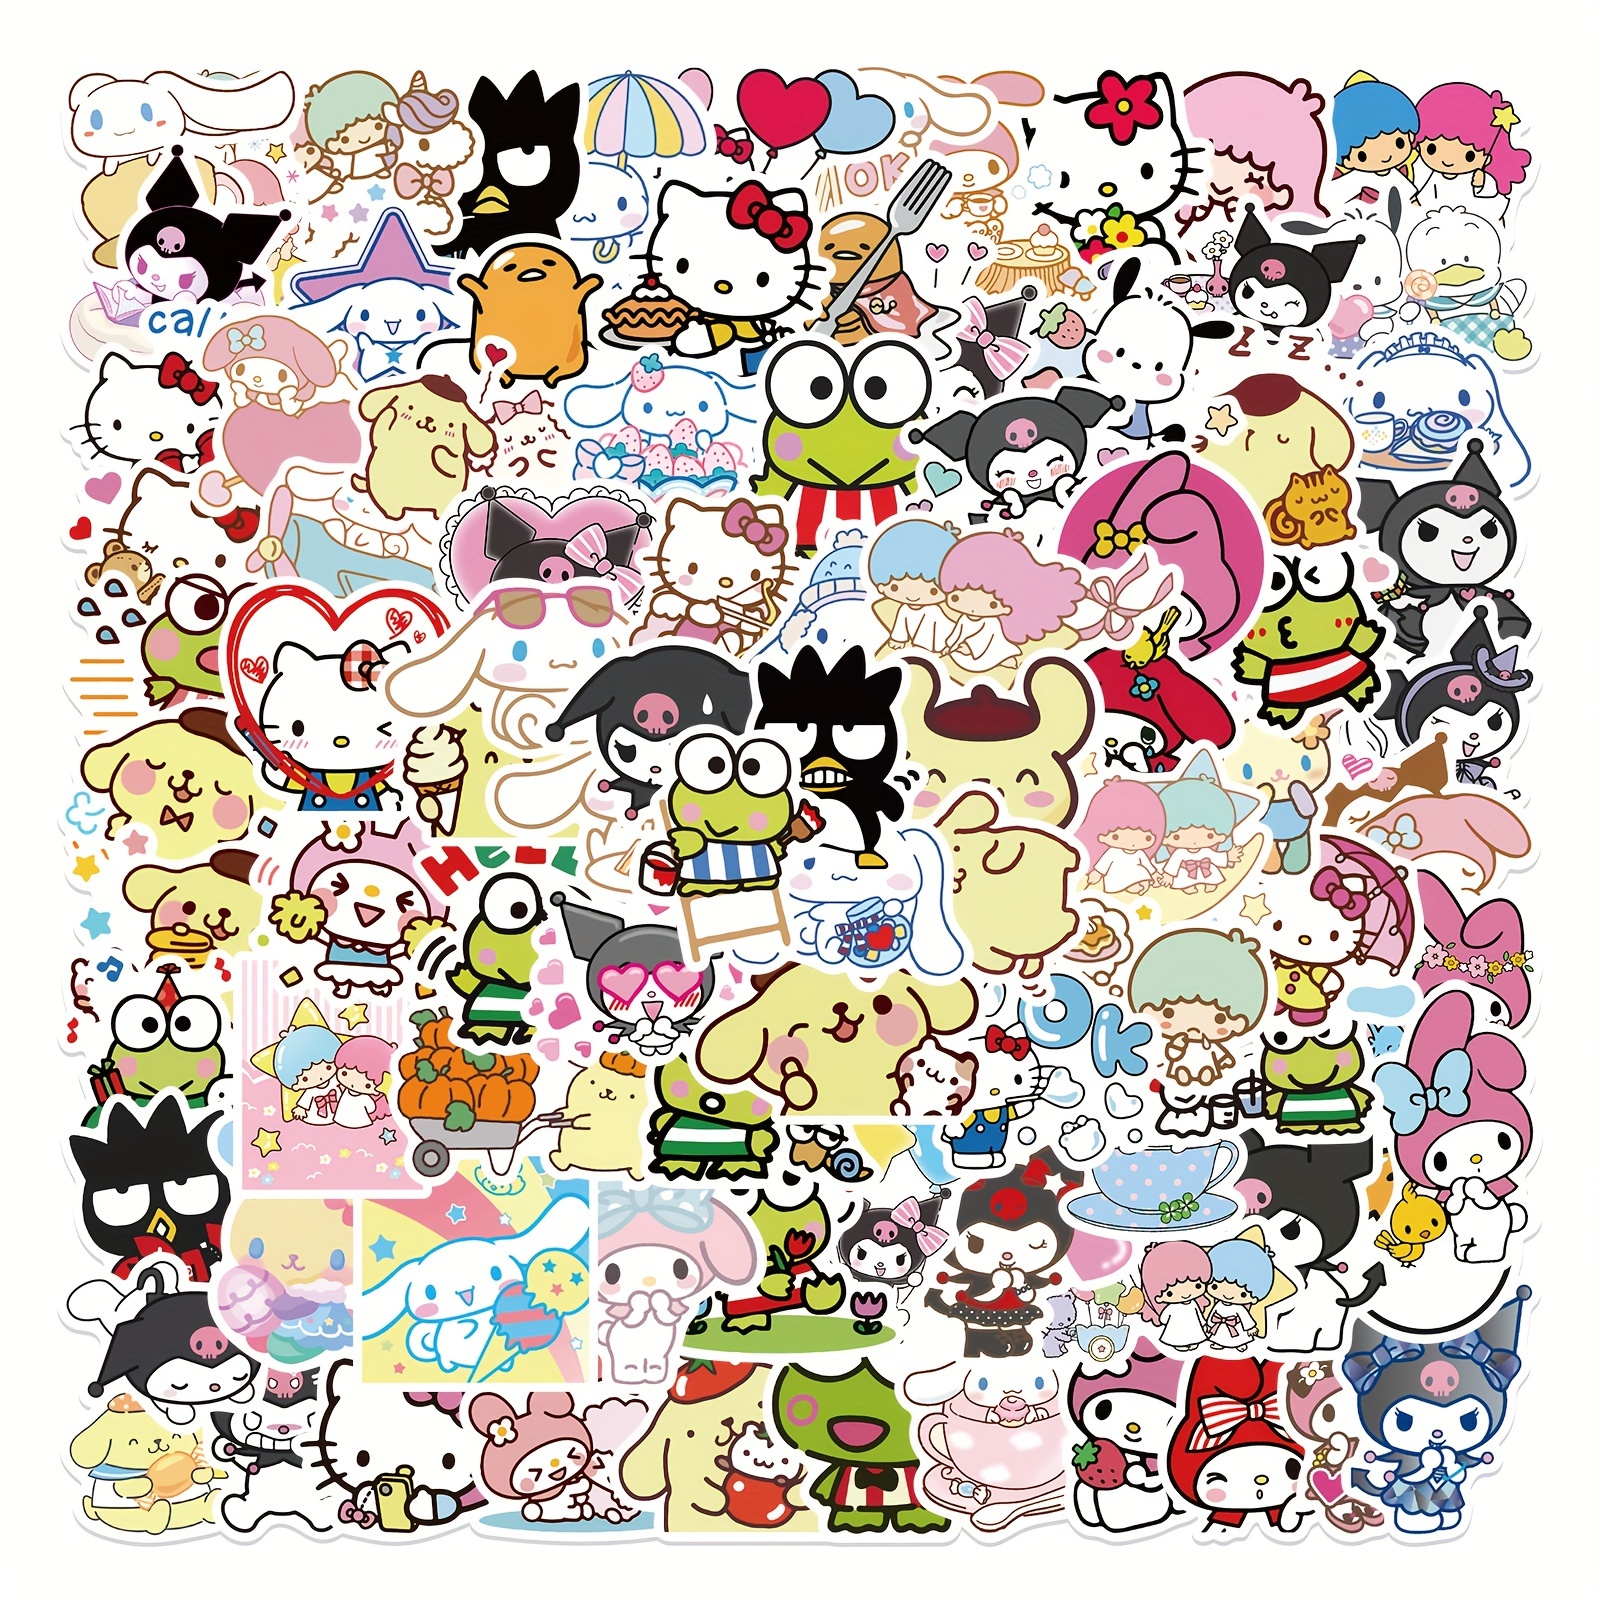 

100pcs Sanrio Collection Cartoon Luggage Waterproof Stickers, Cinnamoroll, My Melody, Desk Decoration, Cute Stickers